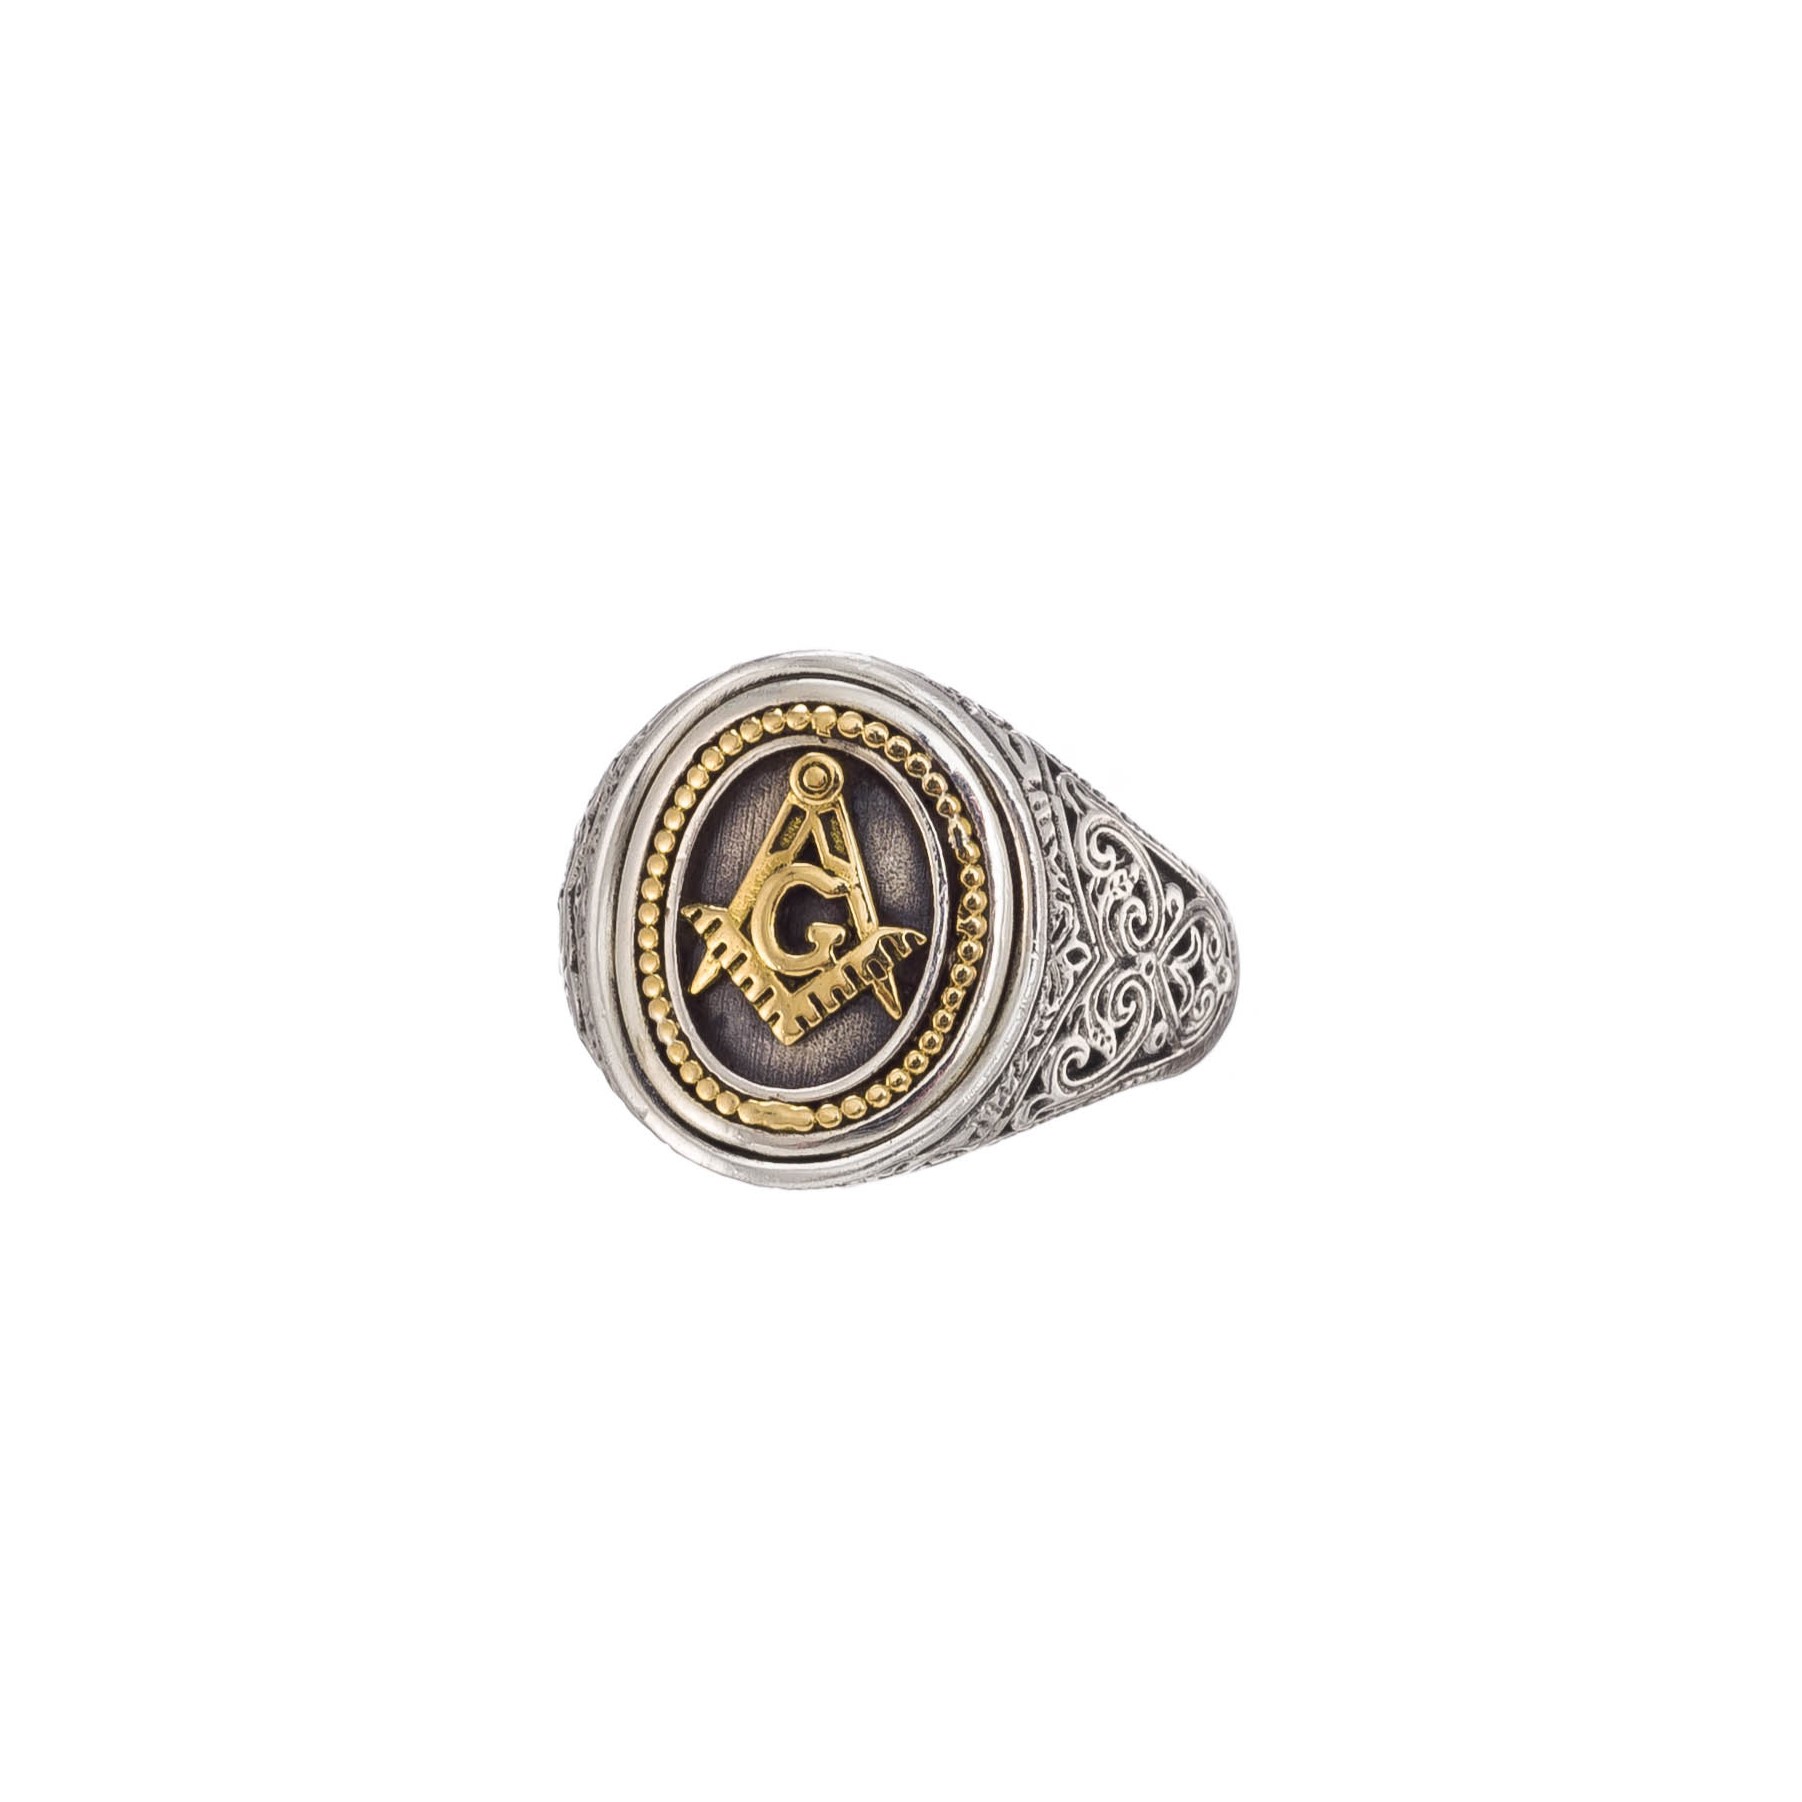 Masonic oval ring in 18K Gold and Sterling Silver